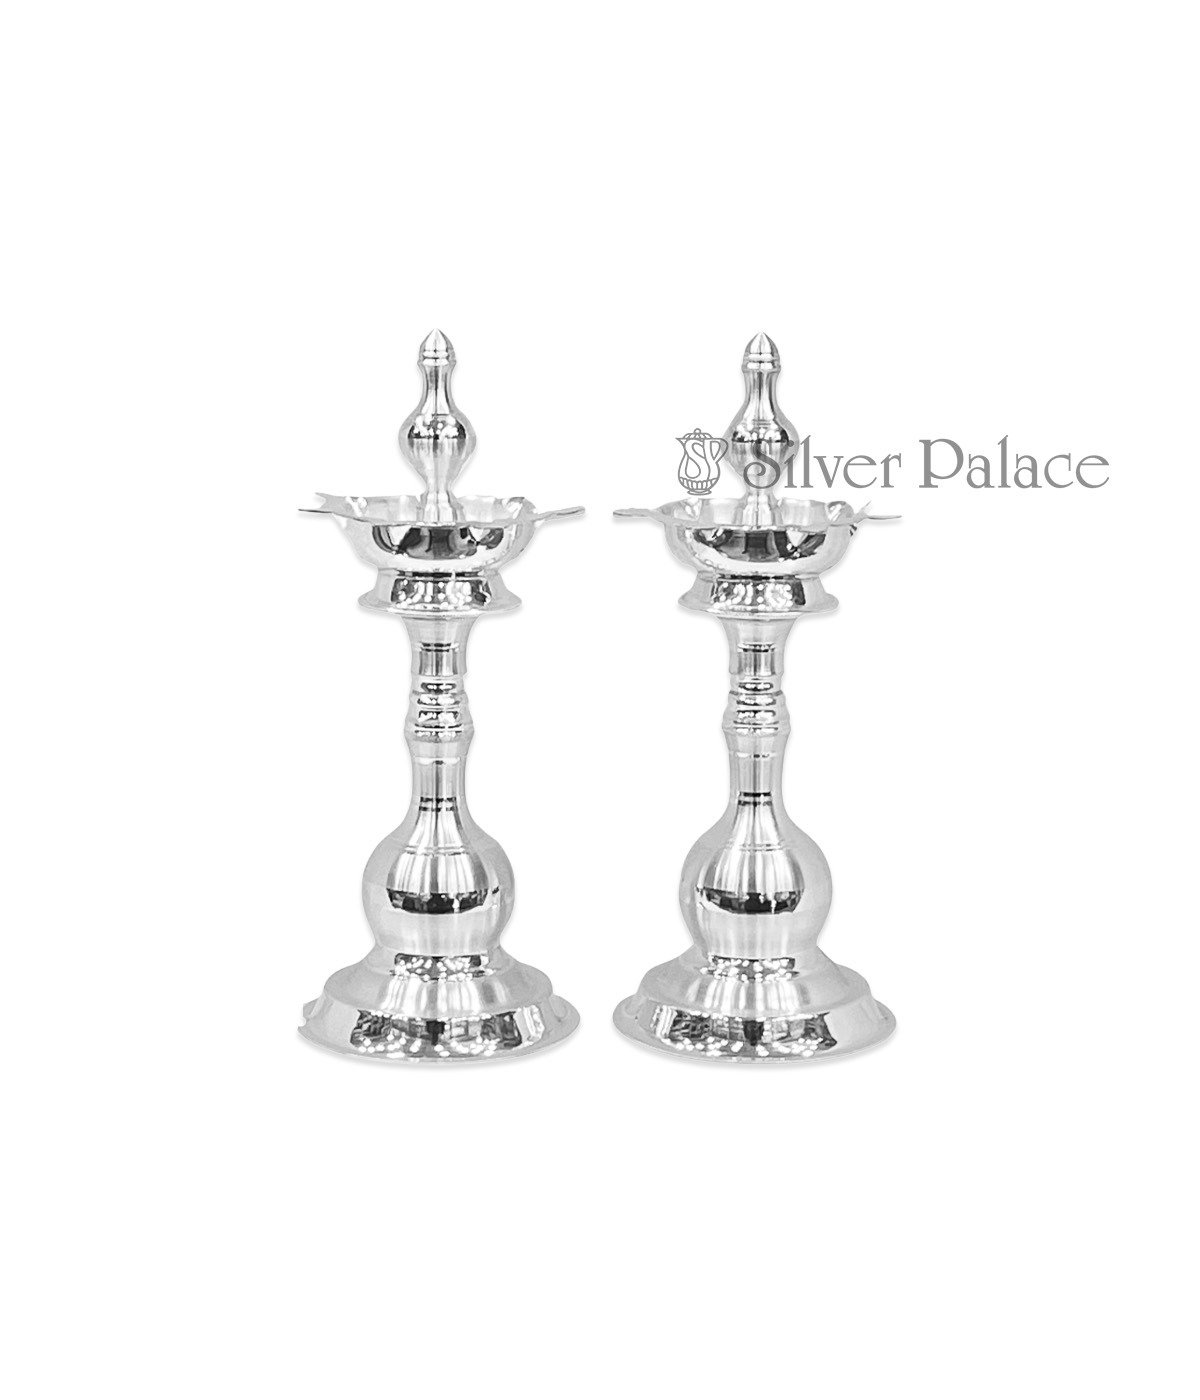 PURE SILVER TRADITIONAL POOJA LAMP IN SILVER